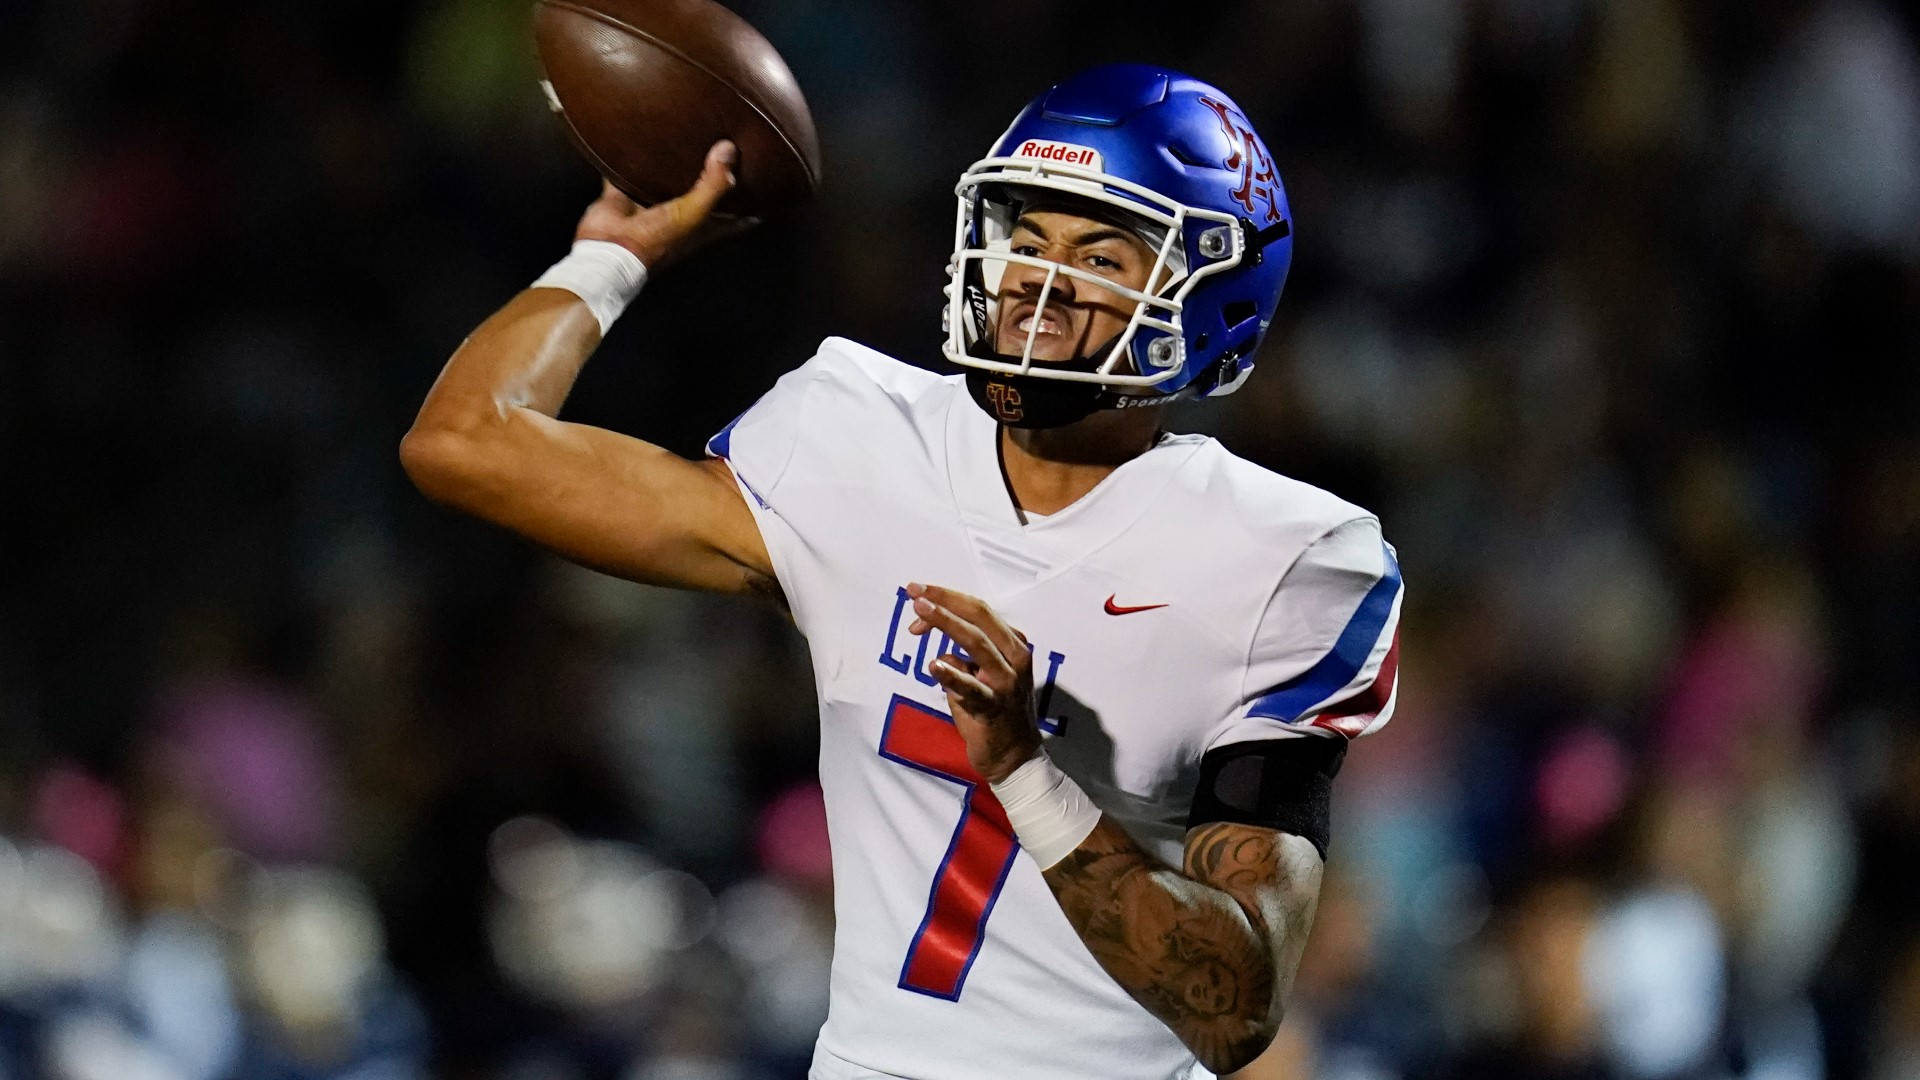 Nelson is the highest-rated recruit in Boise State history. The former No. 1 prospect in the 2023 class announced his commitment to the Broncos on Saturday night.